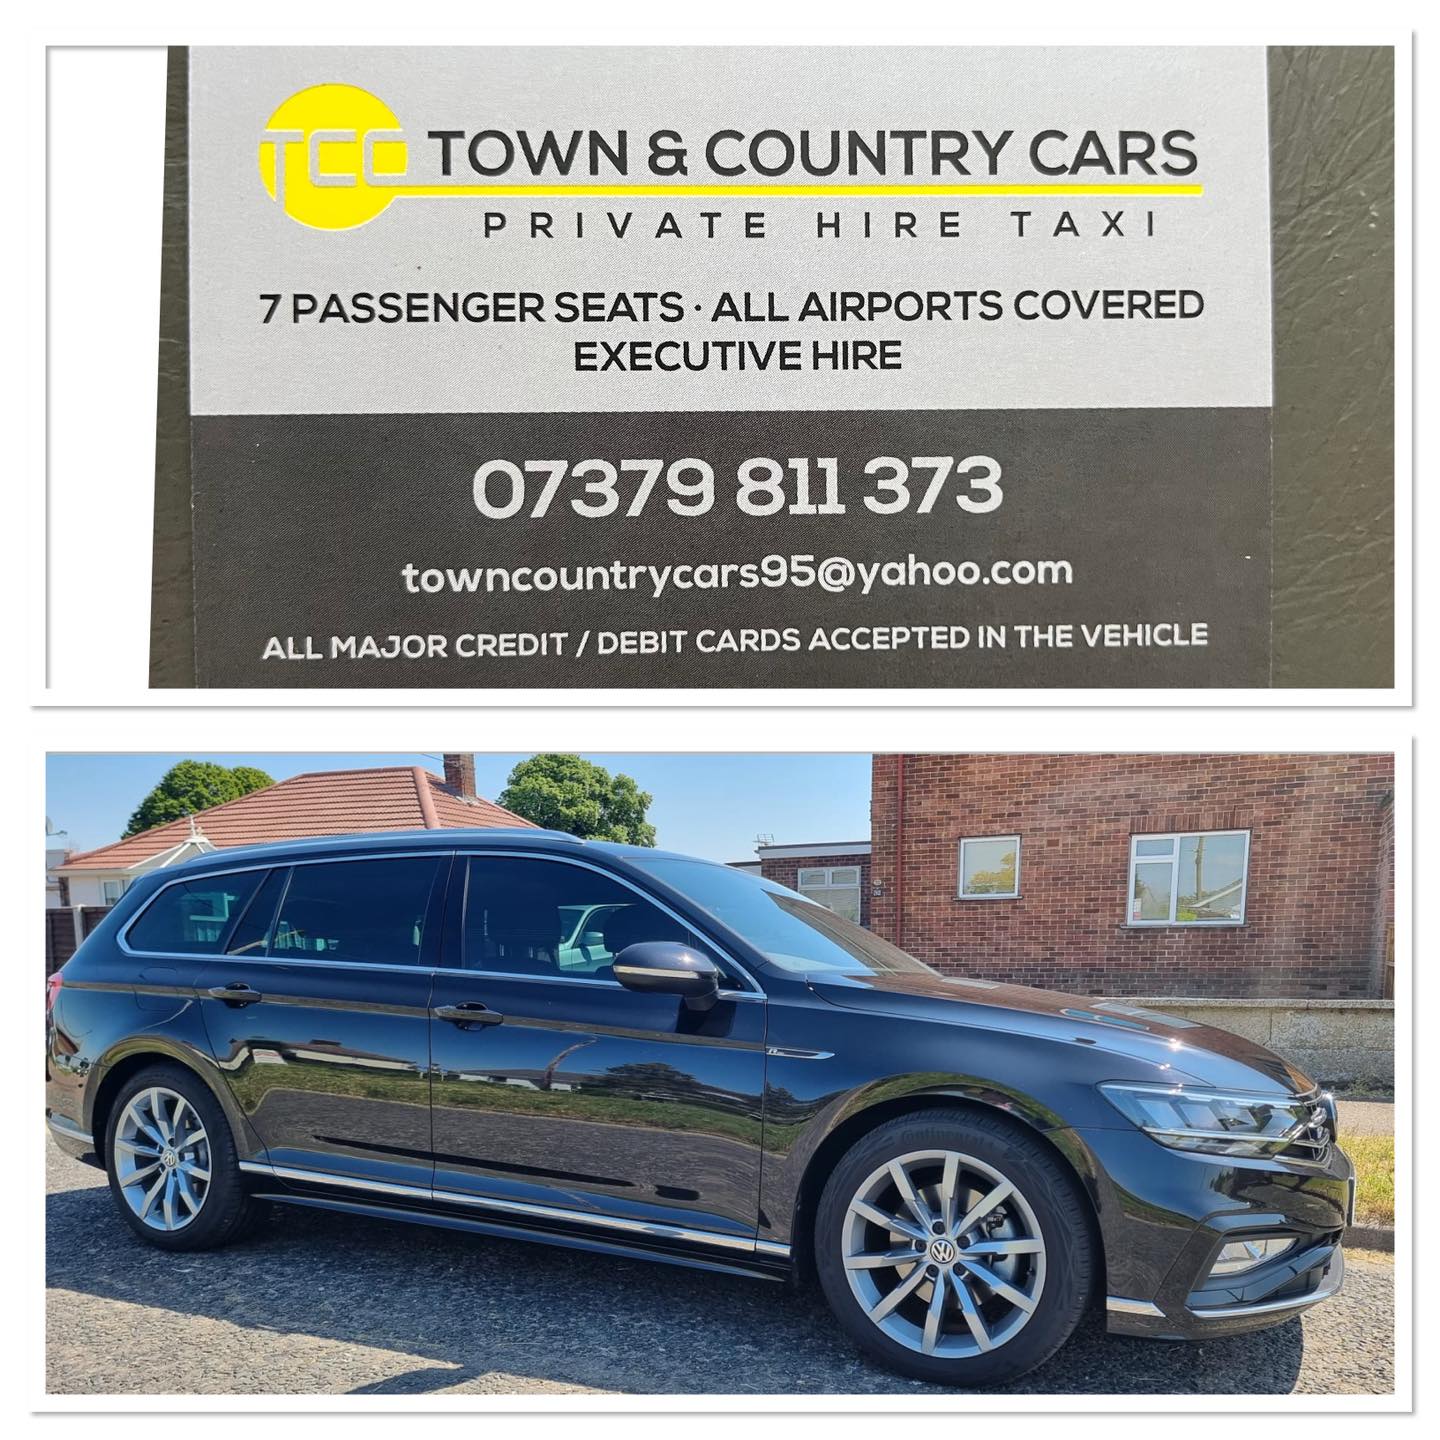 Town and Country Cars - Taxi service specialising in airport transfers